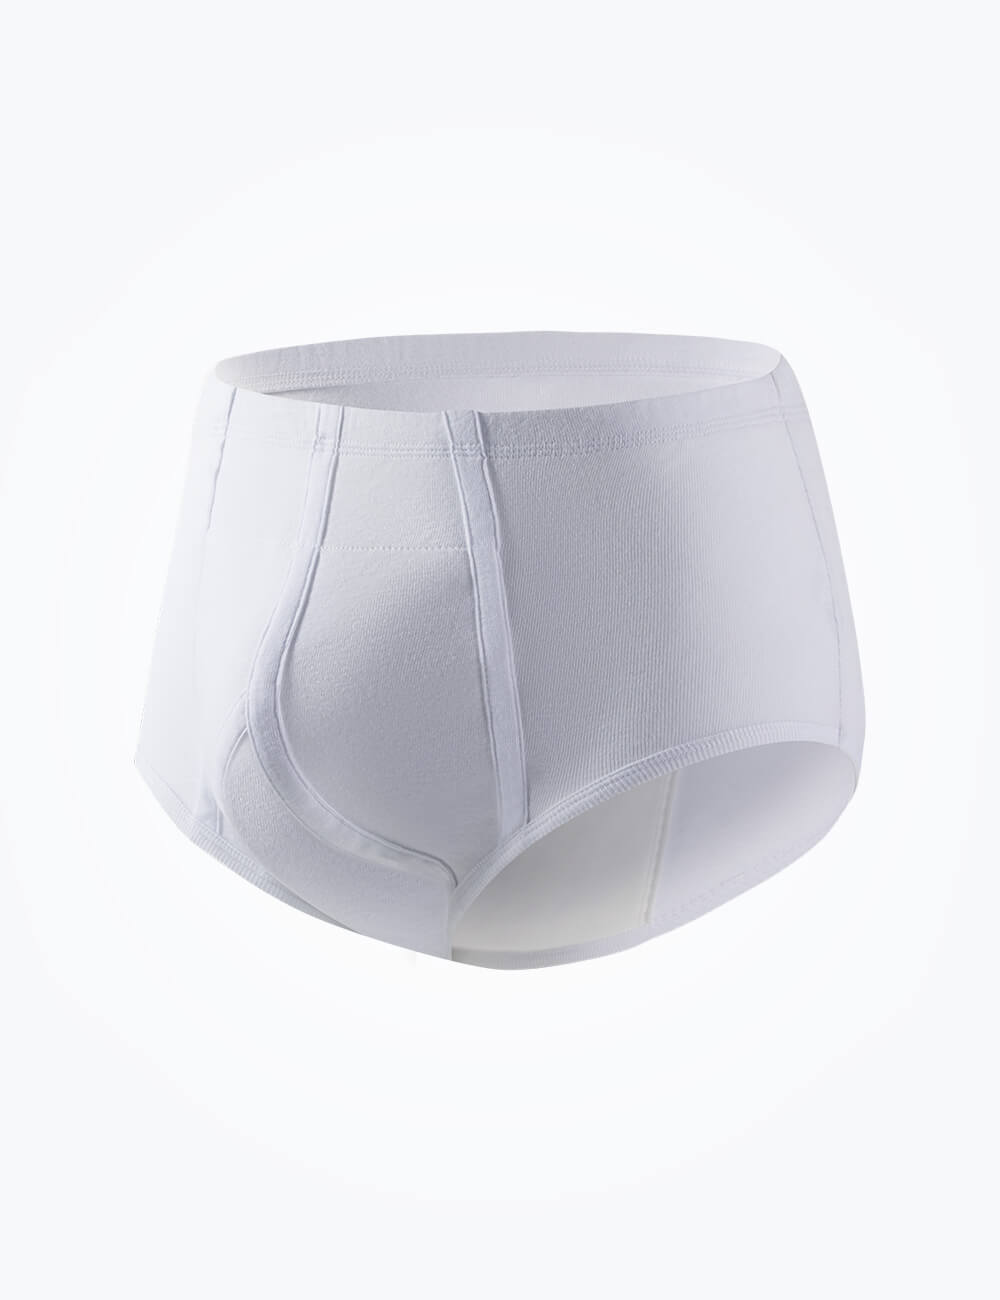 Washable Super Absorbency Cotton Urinary Incontinence Underwear for Women -  W63 – CARERSPK